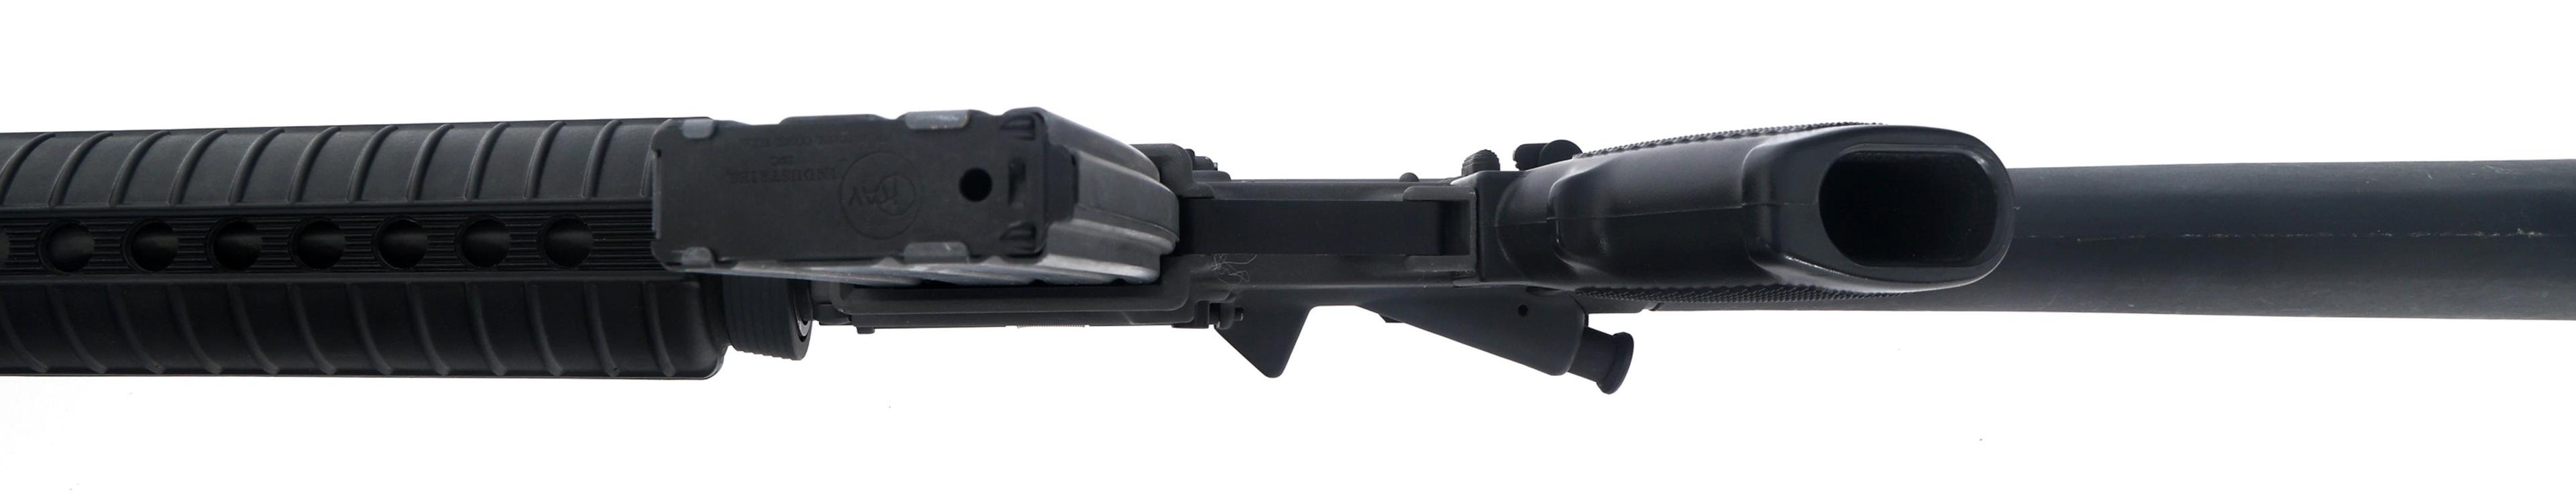 ESSENTIAL ARMS CO MODEL J-15 5.56x45mm RIFLE